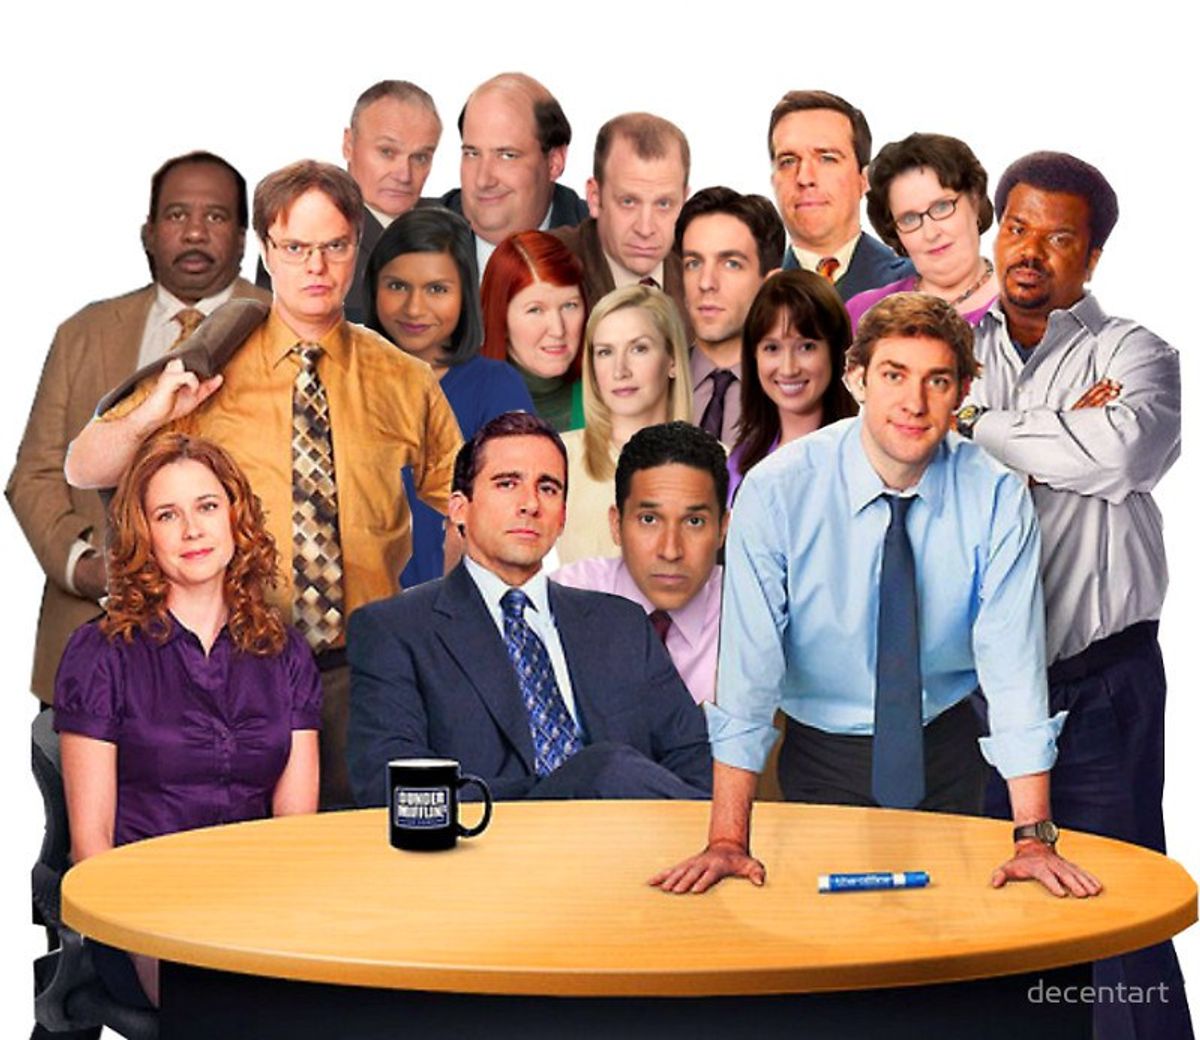 Thanksgiving Dinner, as told by The Office